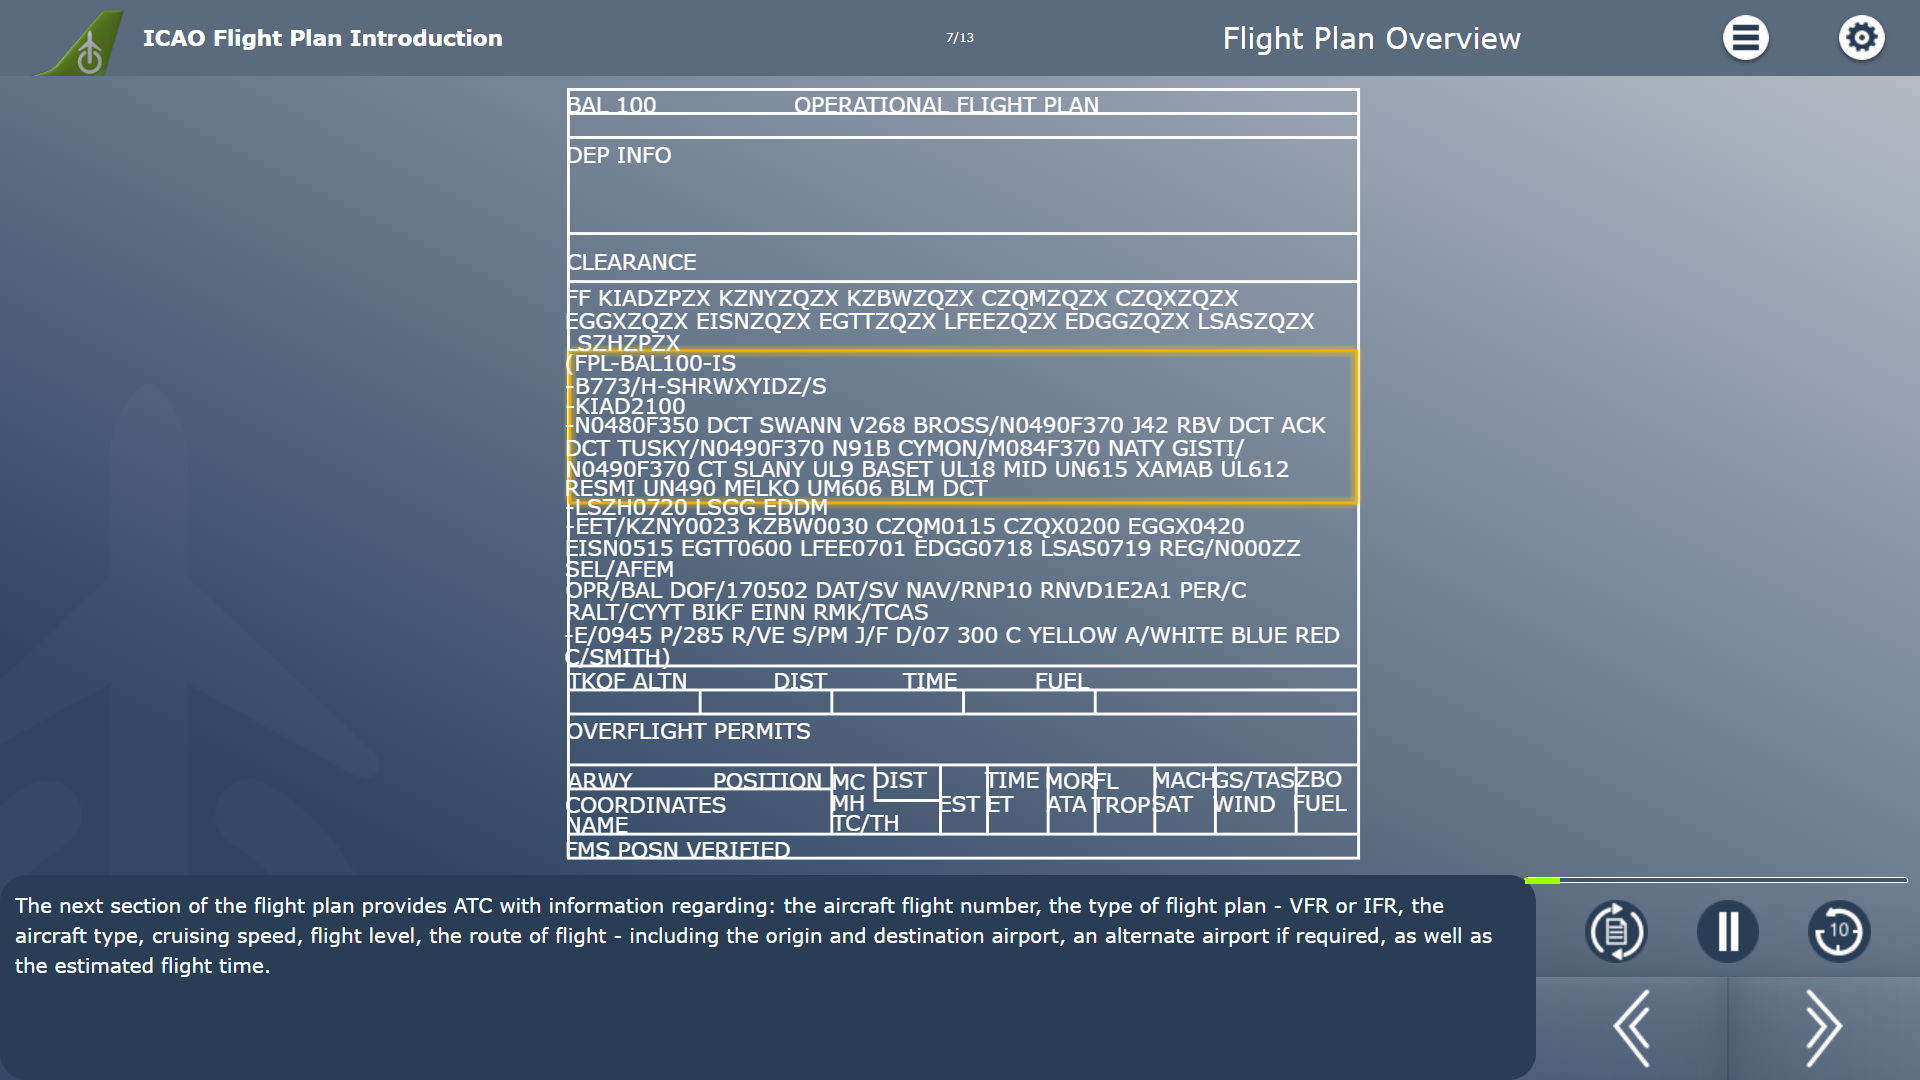 ICAO Flight Plan Introduction Example